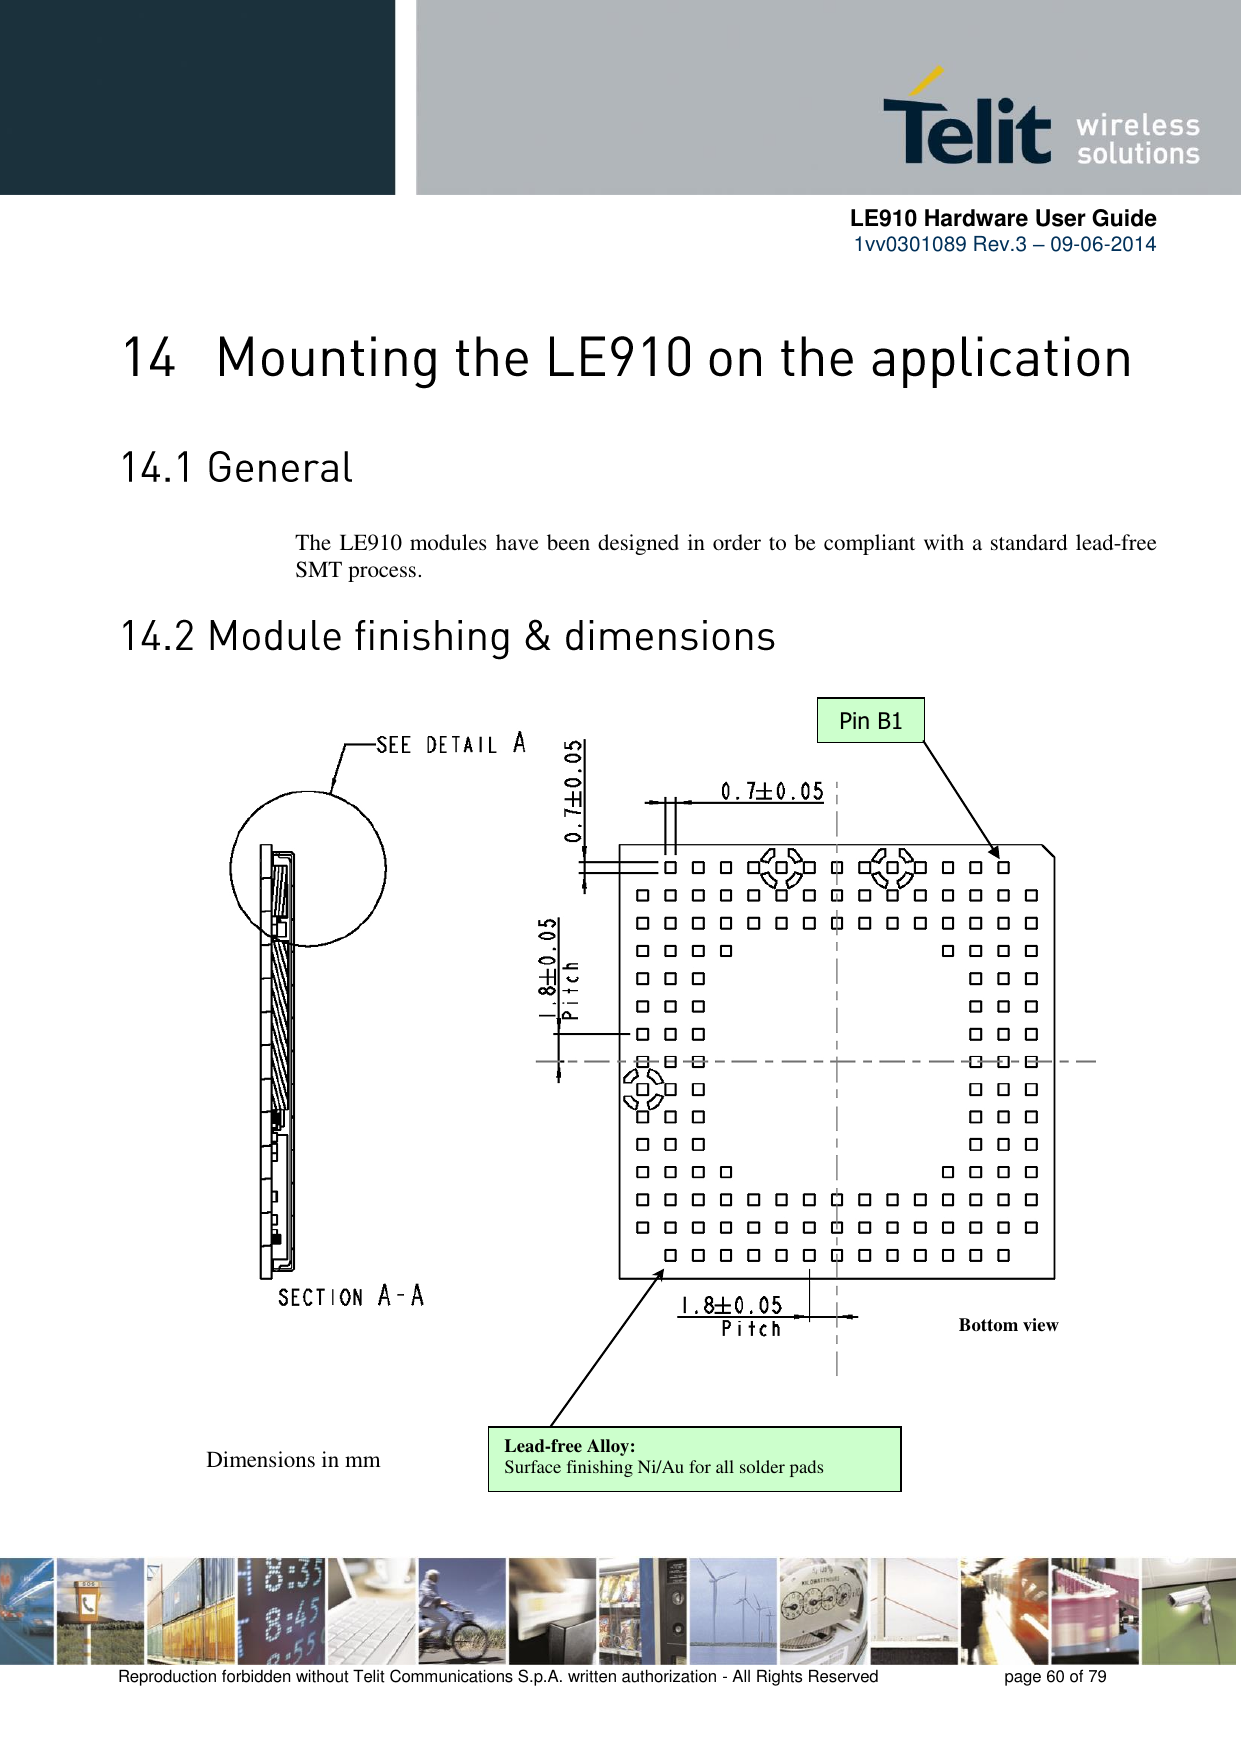      LE910 Hardware User Guide 1vv0301089 Rev.3 – 09-06-2014    Reproduction forbidden without Telit Communications S.p.A. written authorization - All Rights Reserved    page 60 of 79    The LE910 modules have been designed in order to be compliant with a standard lead-free SMT process.  Pin B1 Dimensions in mm Bottom view Lead-free Alloy: Surface finishing Ni/Au for all solder pads  